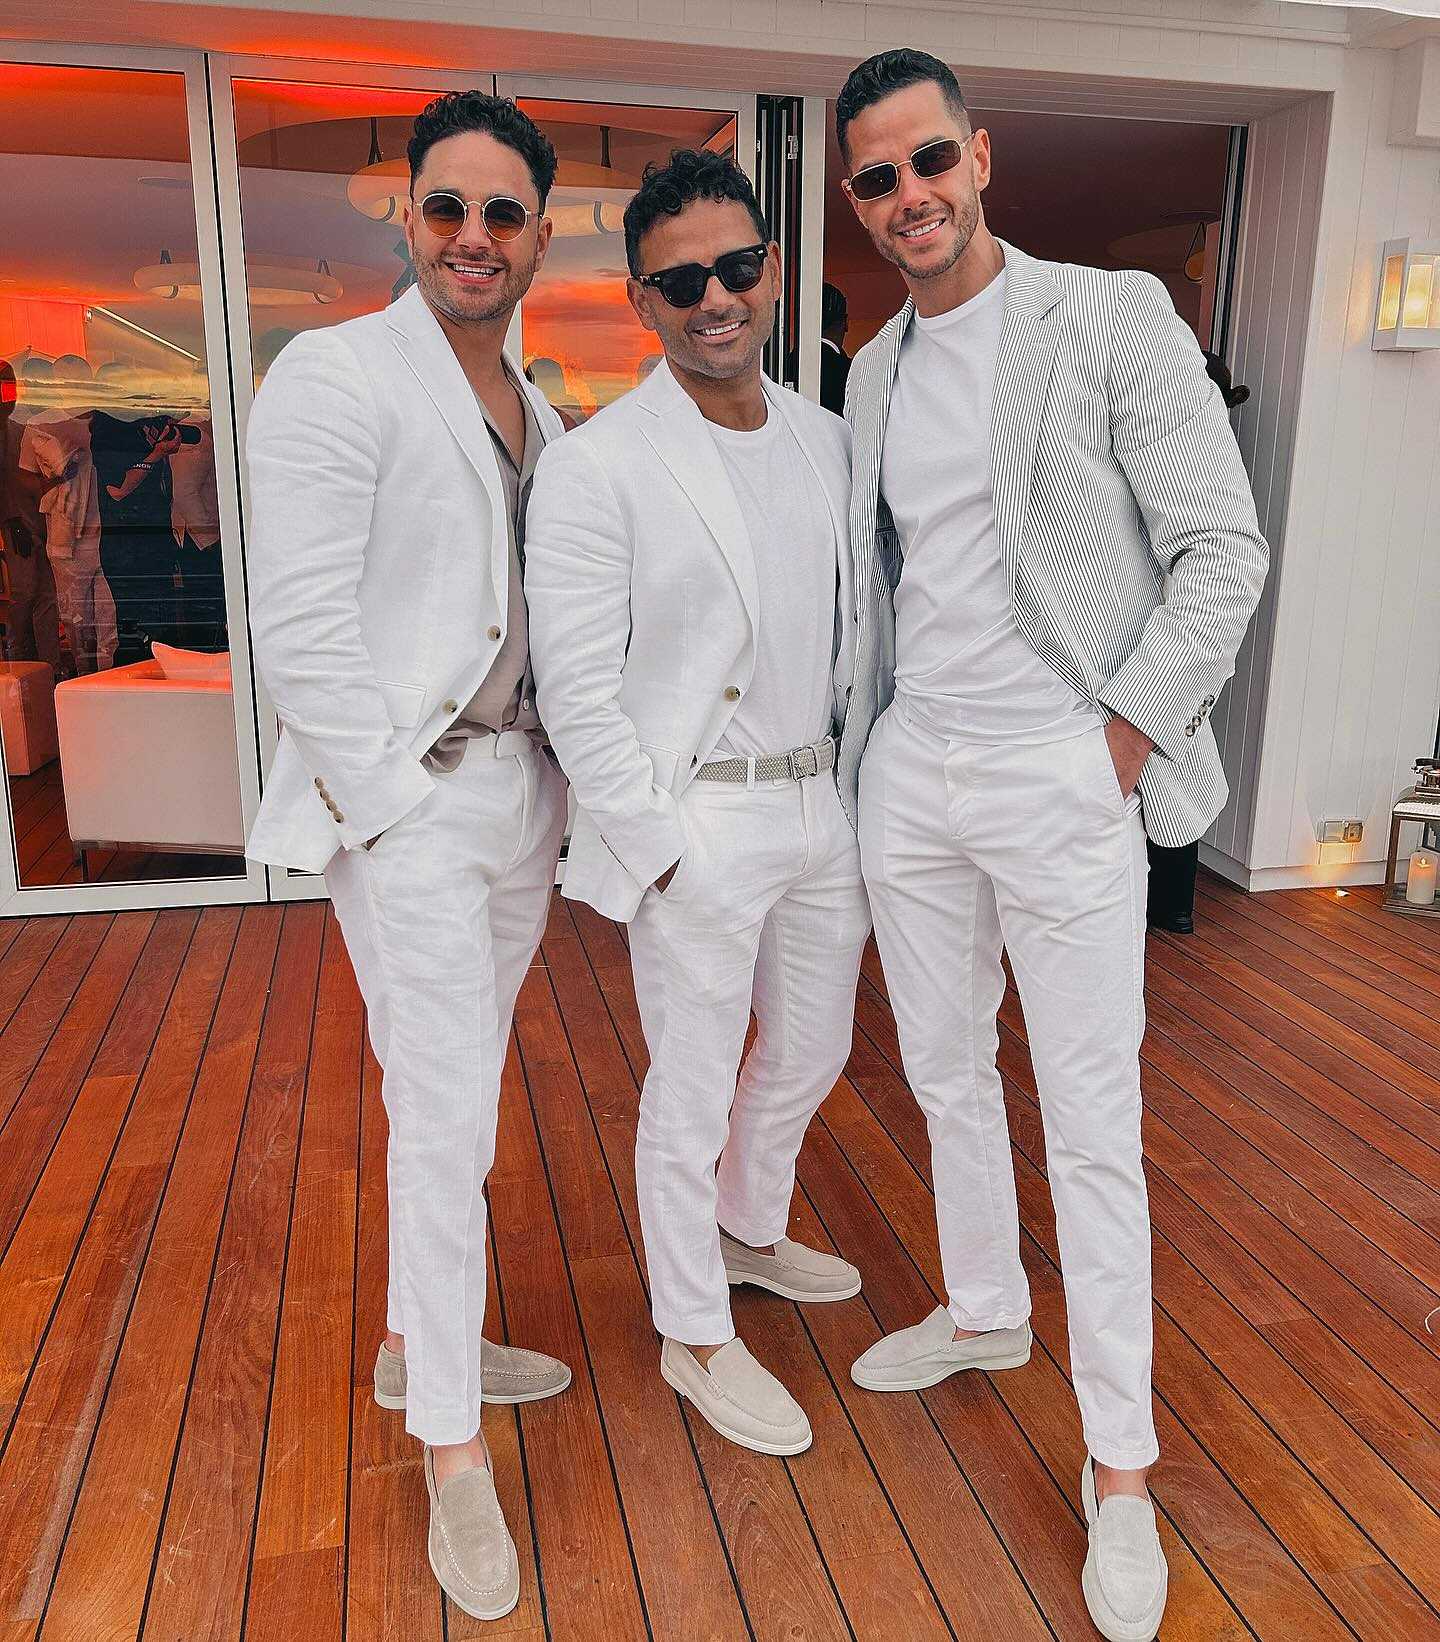 Ryan Thomas, who was the best man at the wedding, with Umar's brothers Alex and Scott